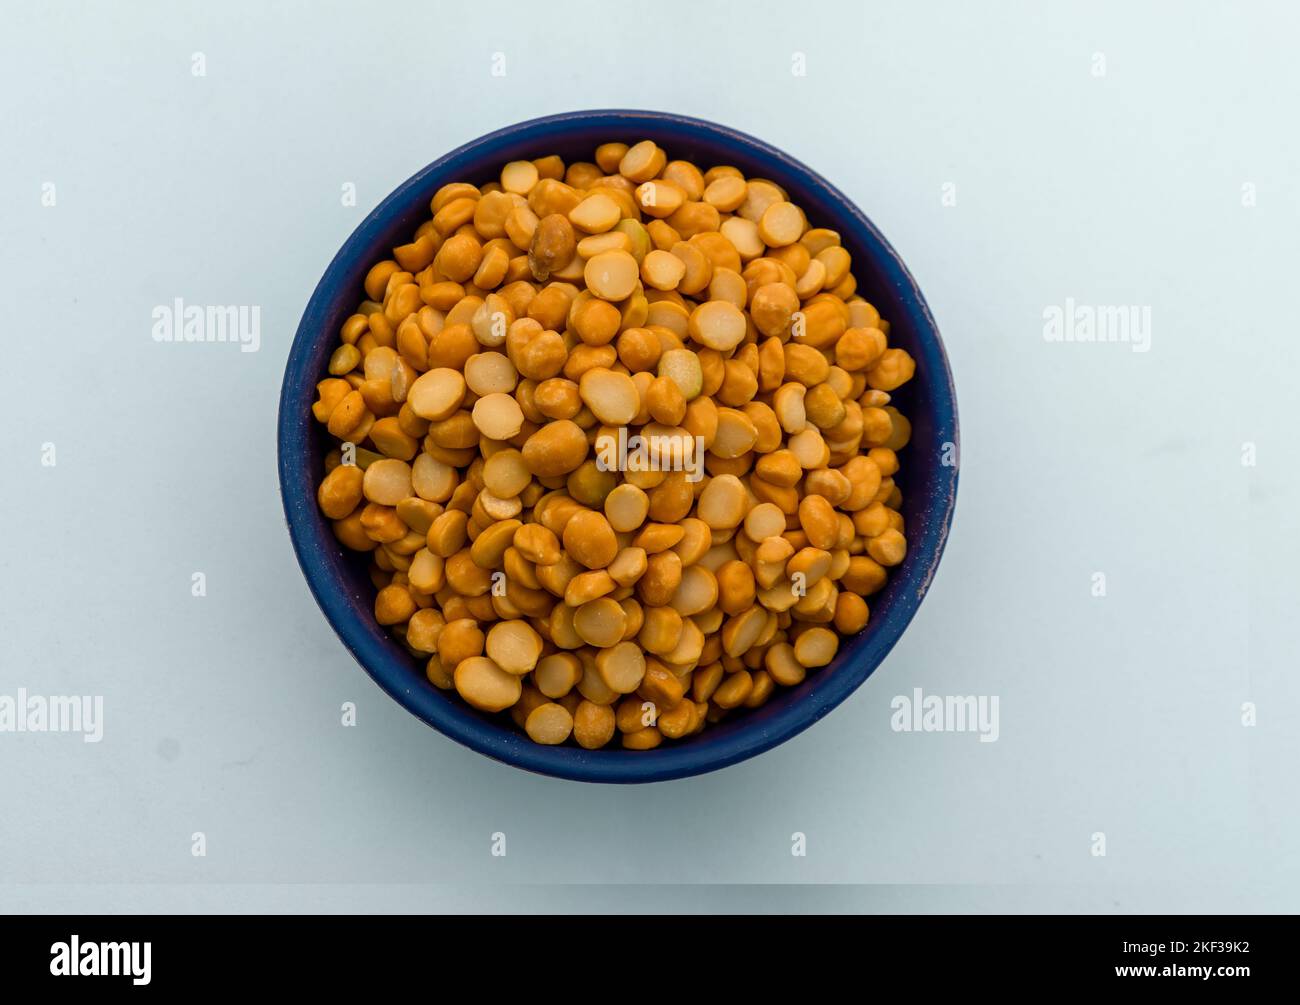 A bowl containing 'chana dal' or yellow split chickpeas on a white background. Selective Focus in center. Stock Photo